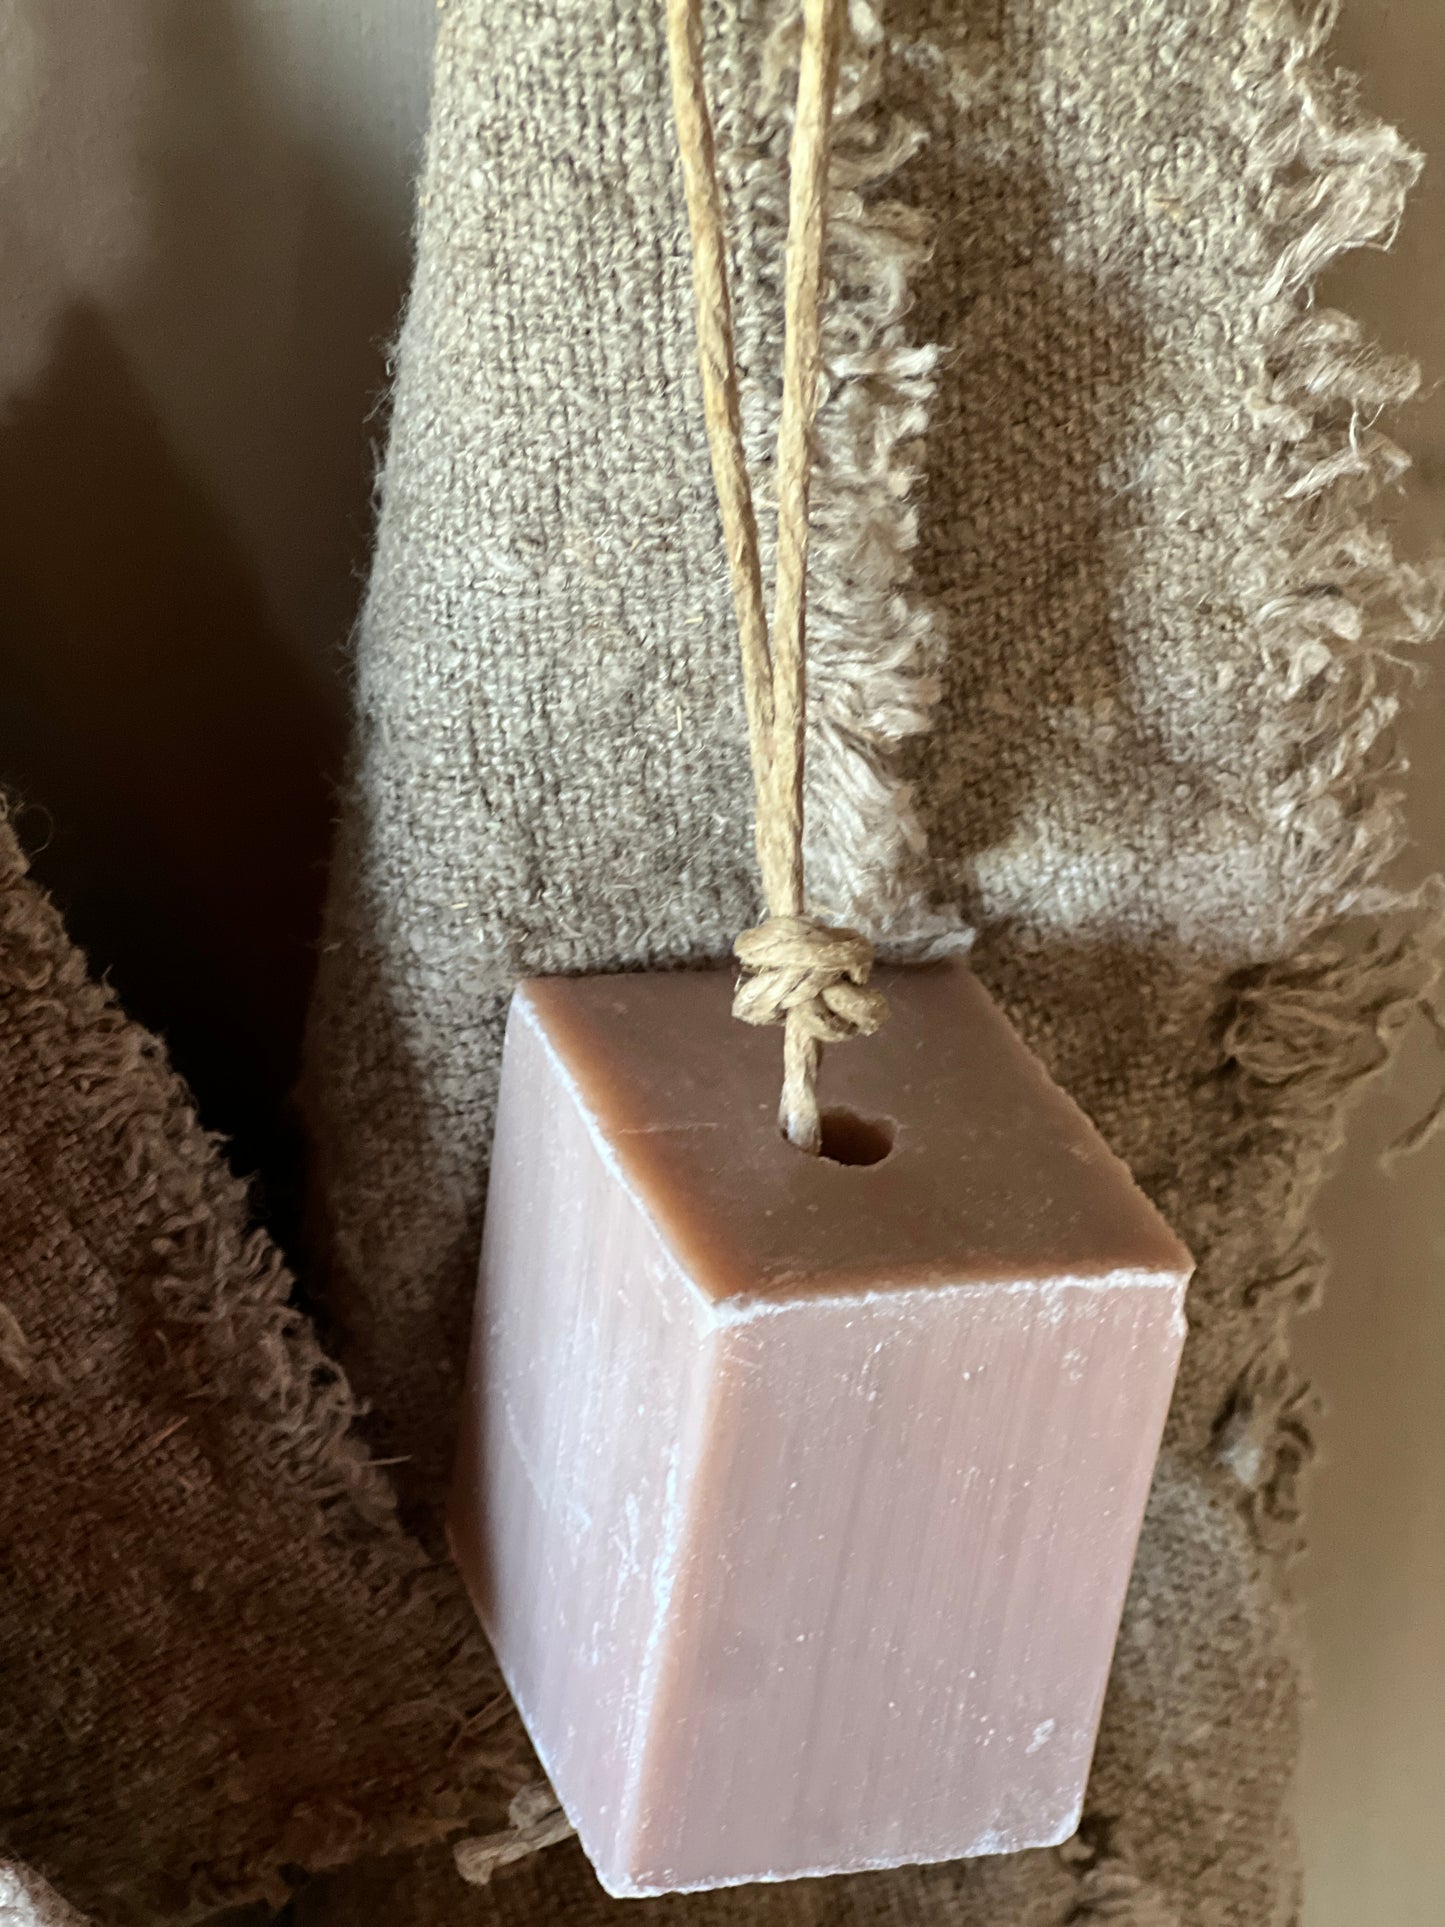 Block soap on a sturdy cord (Liver)